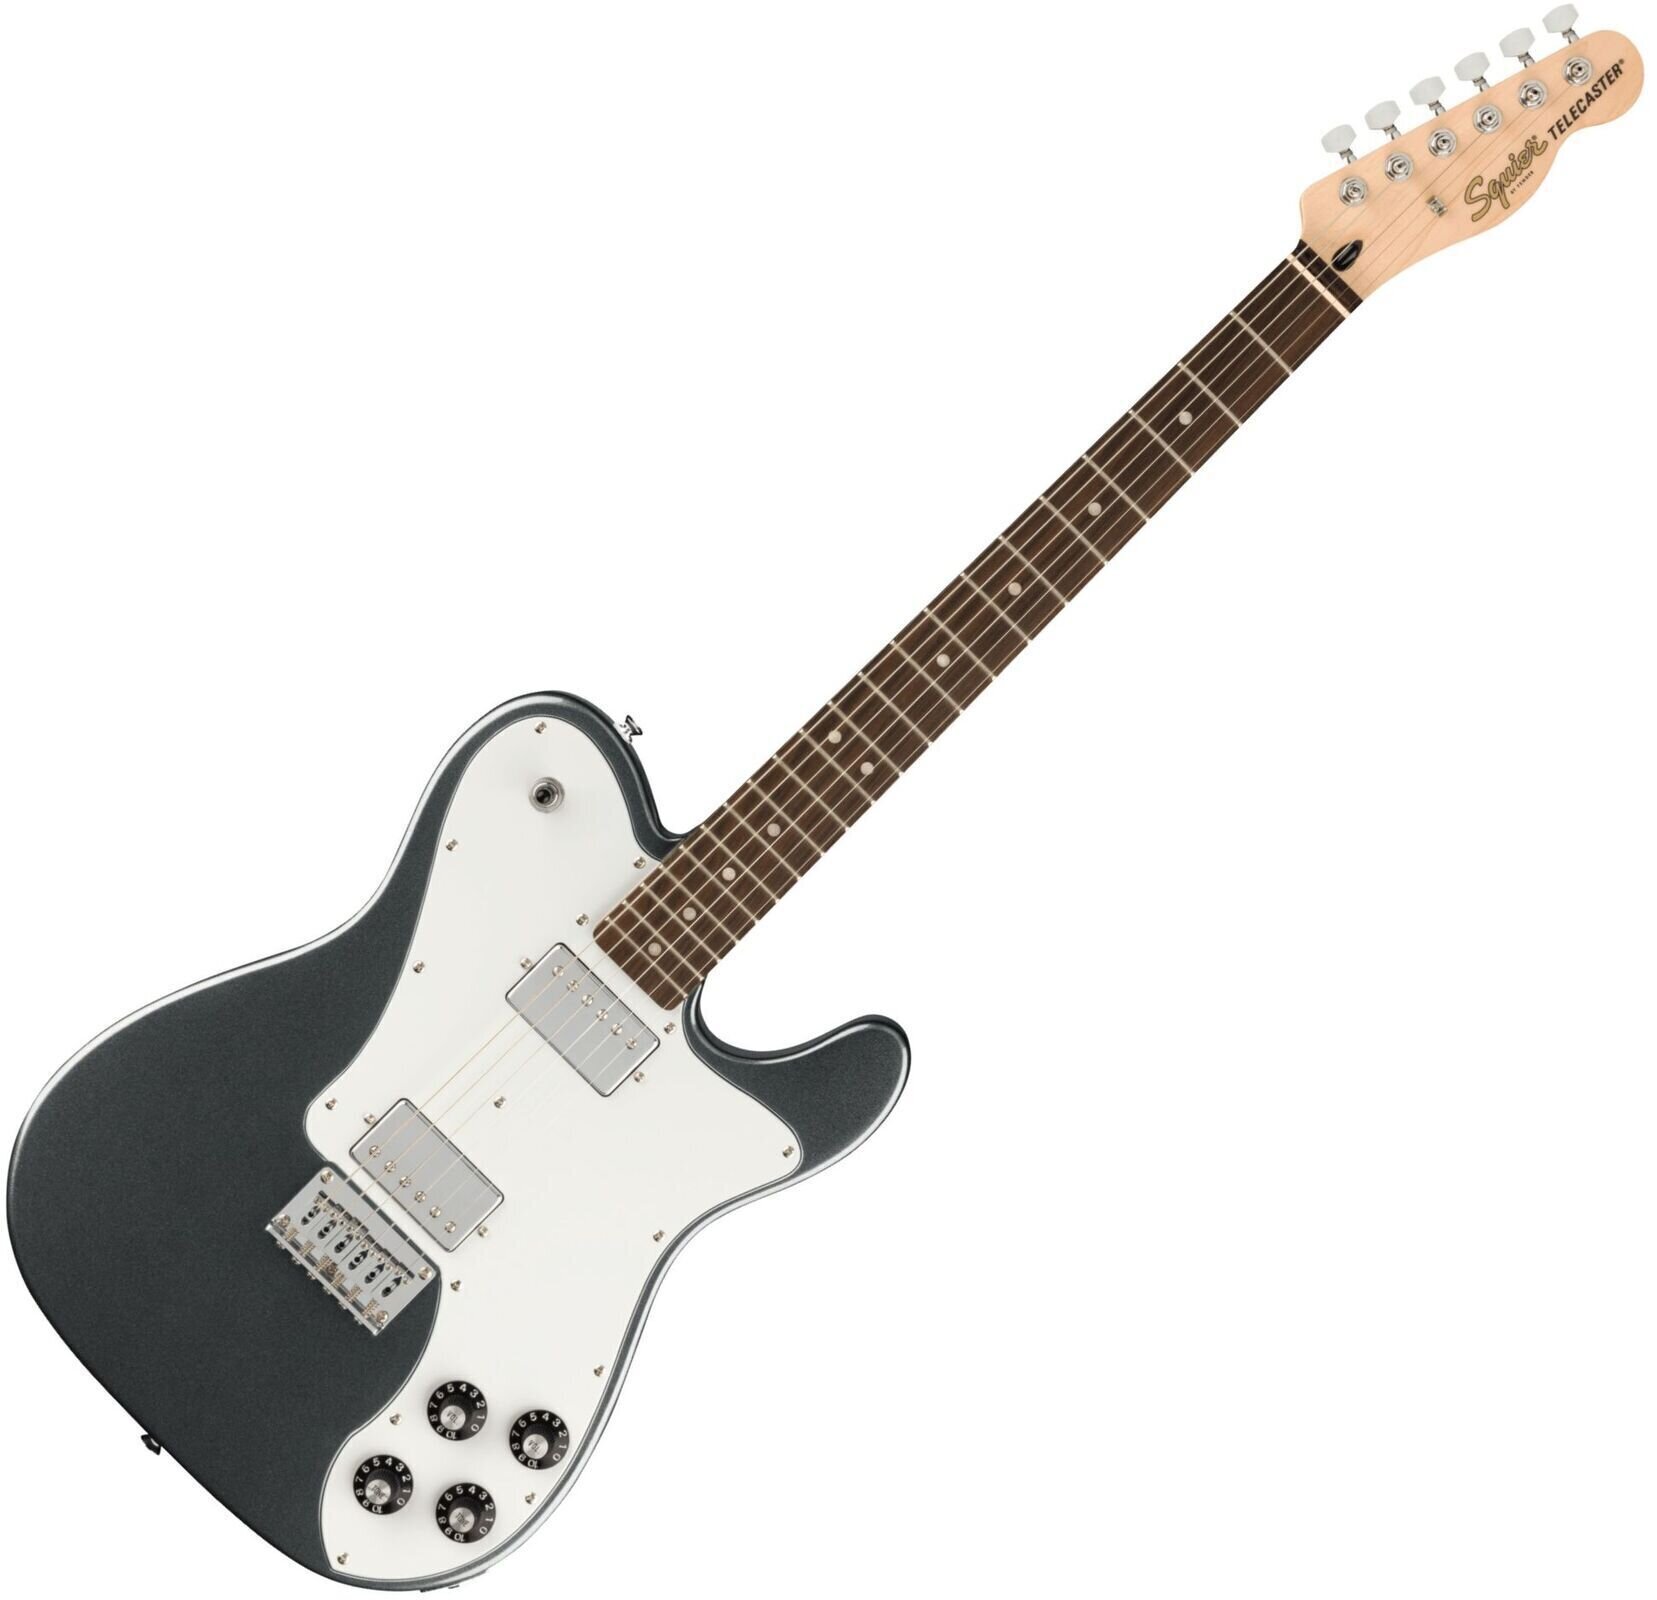 Chitară electrică Fender Squier Affinity Series Telecaster Deluxe Charcoal Frost Metallic